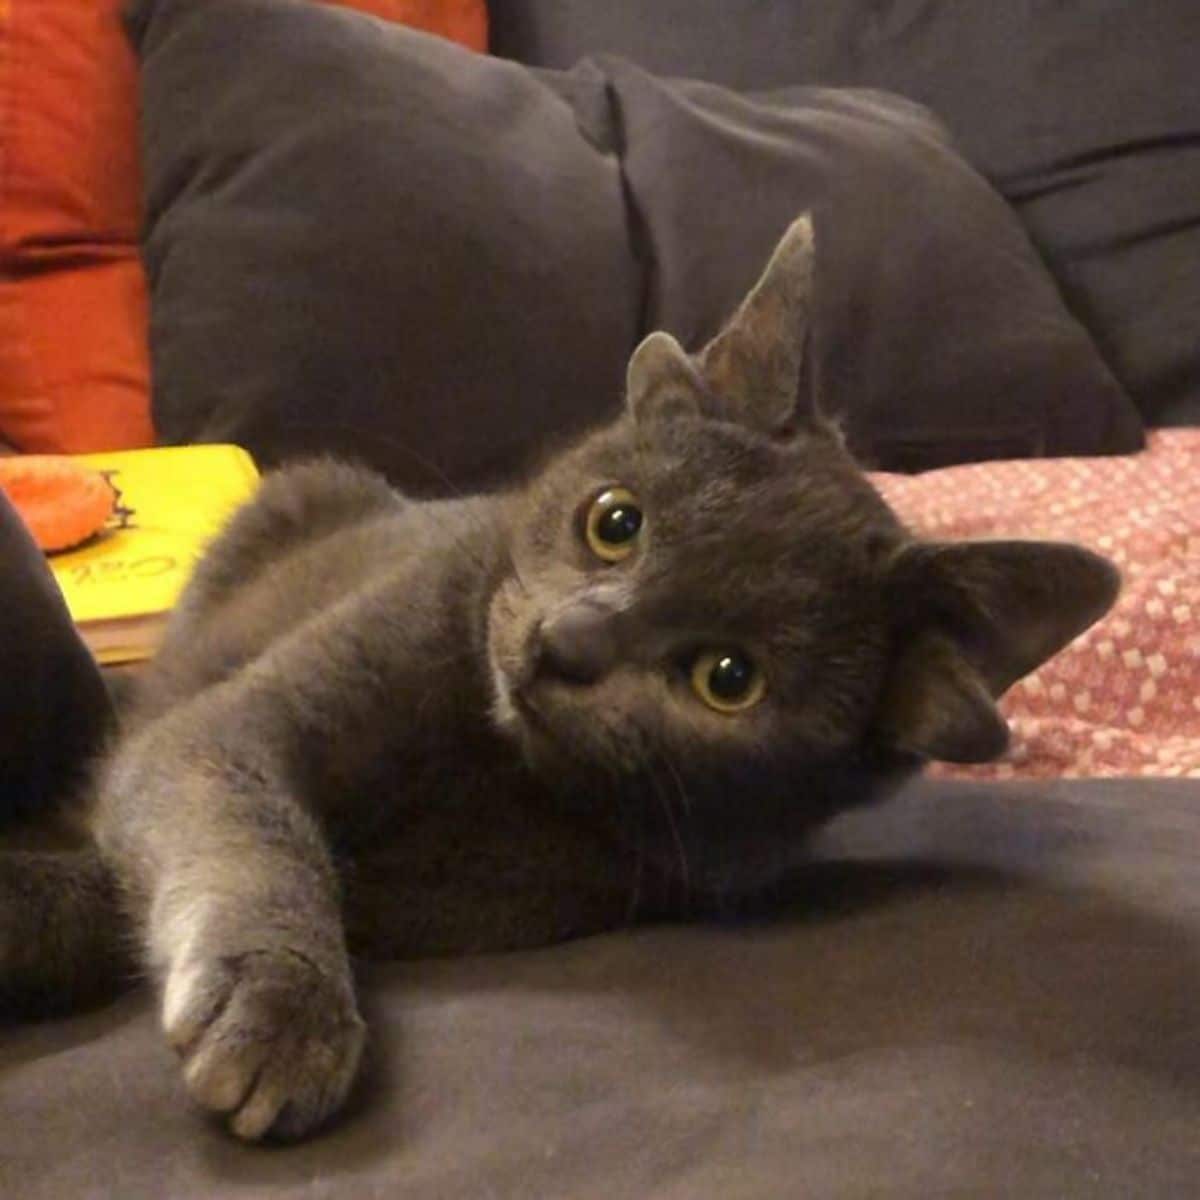 grey kitten with four ears laying on a grey sofa on an orange blanket with the right front paw extended on a sofa cushion